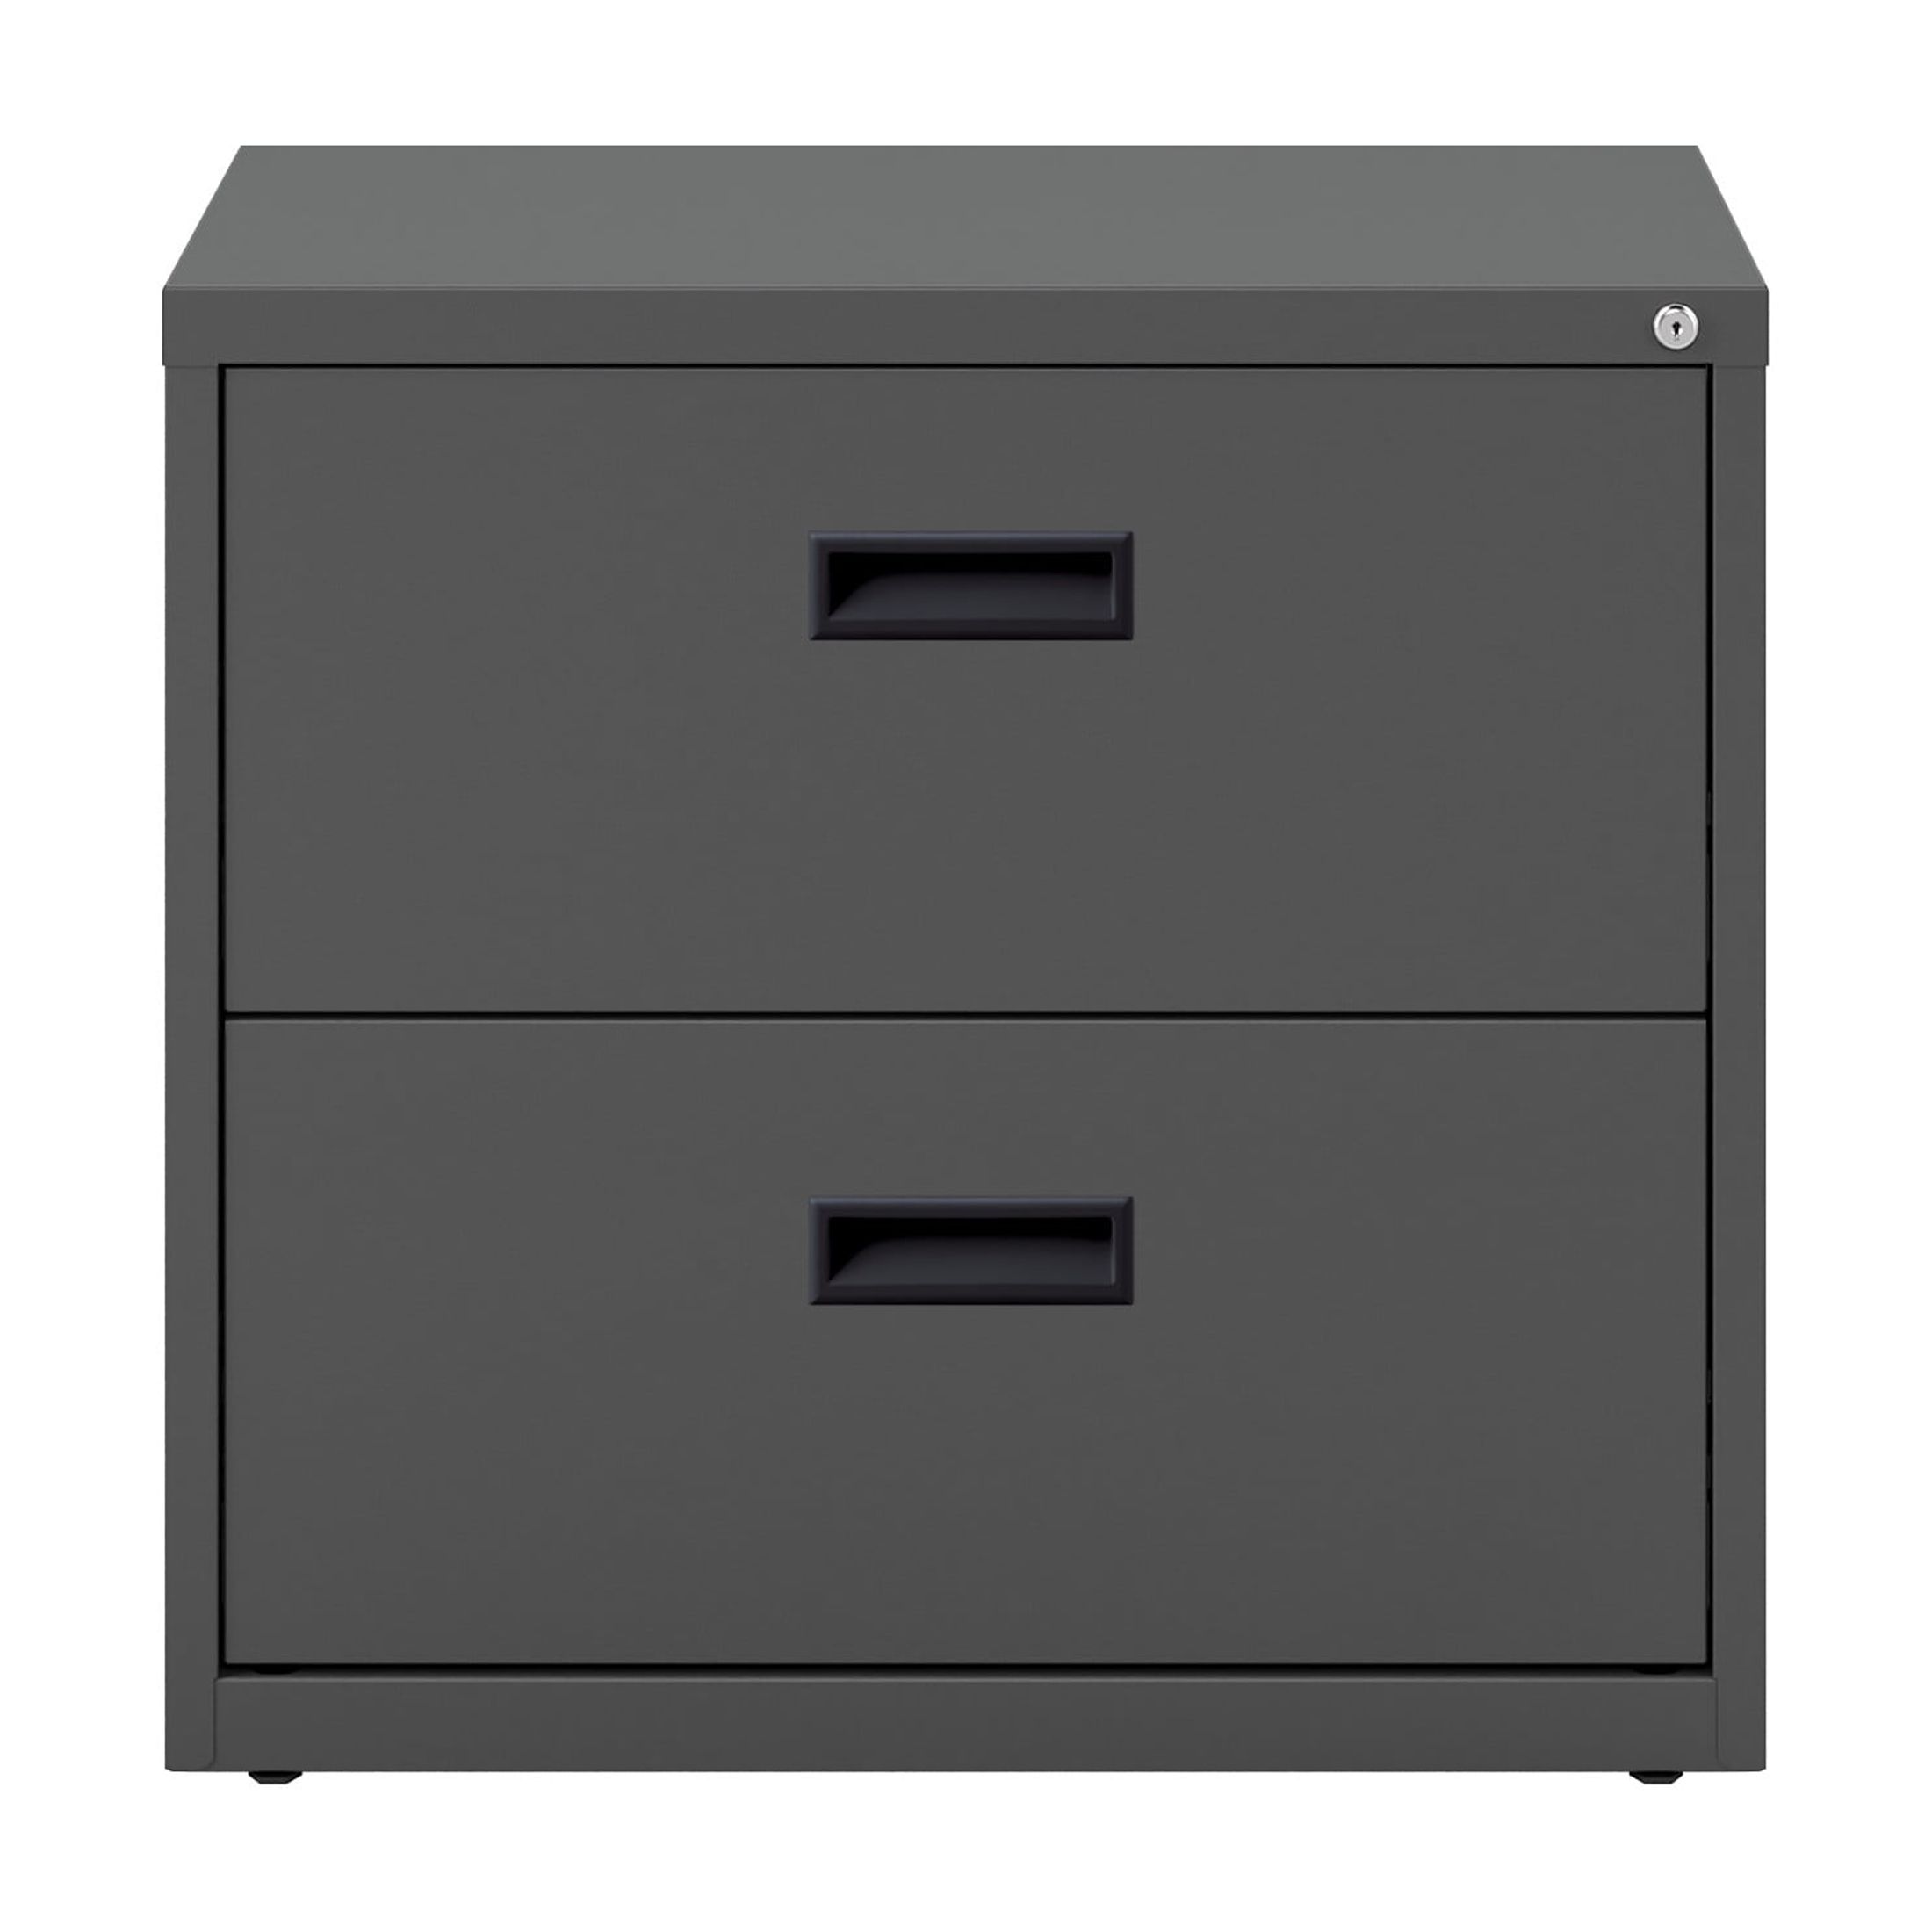 Hirsh 30 inch Wide 2 Drawer Lateral File Cabinet for Home or Office, Charcoal - image 2 of 5